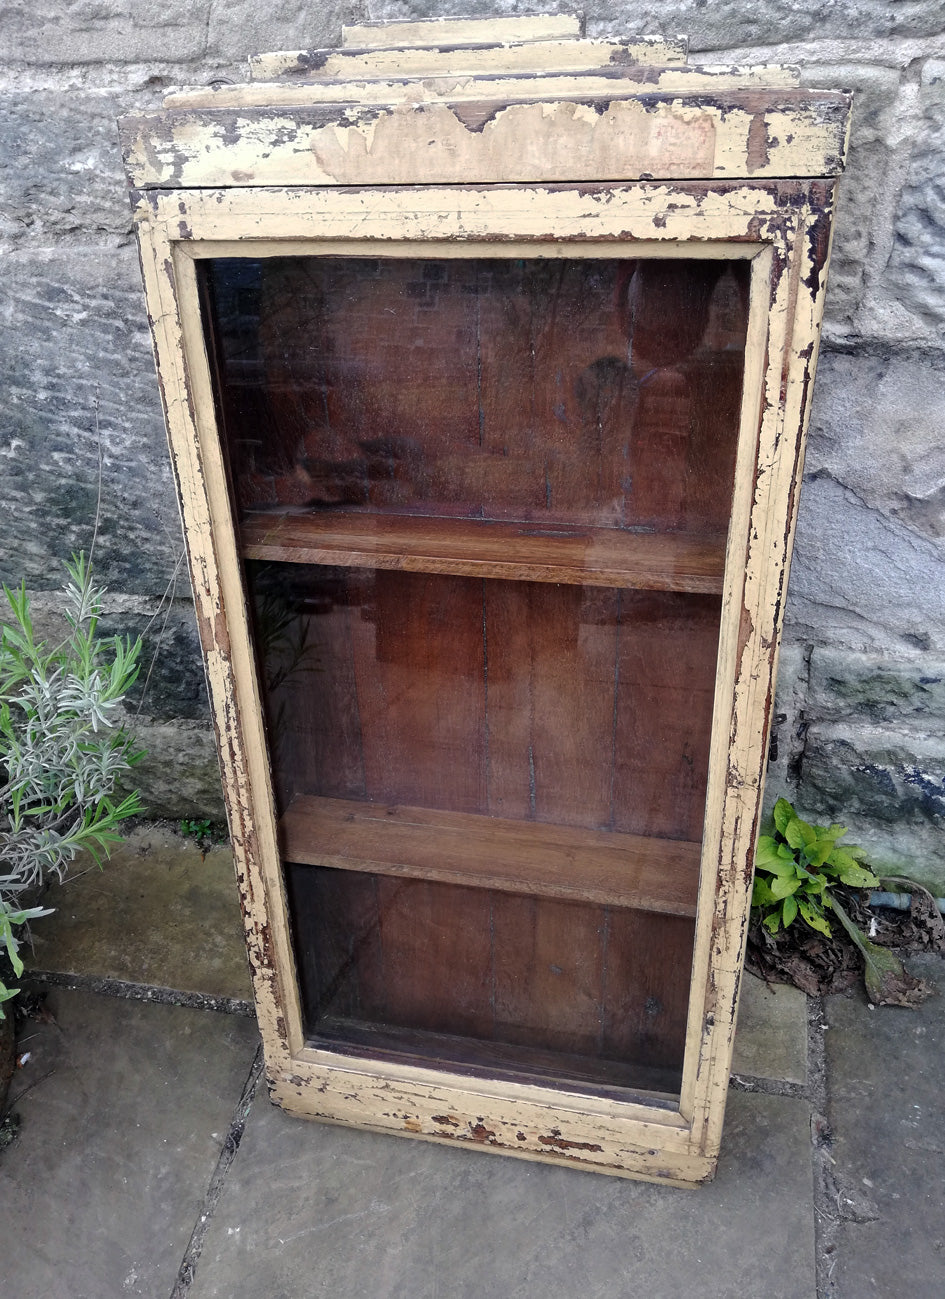 Beautiful antique teak painted glass fronted wall cabinet with original golden yellow chippy paint